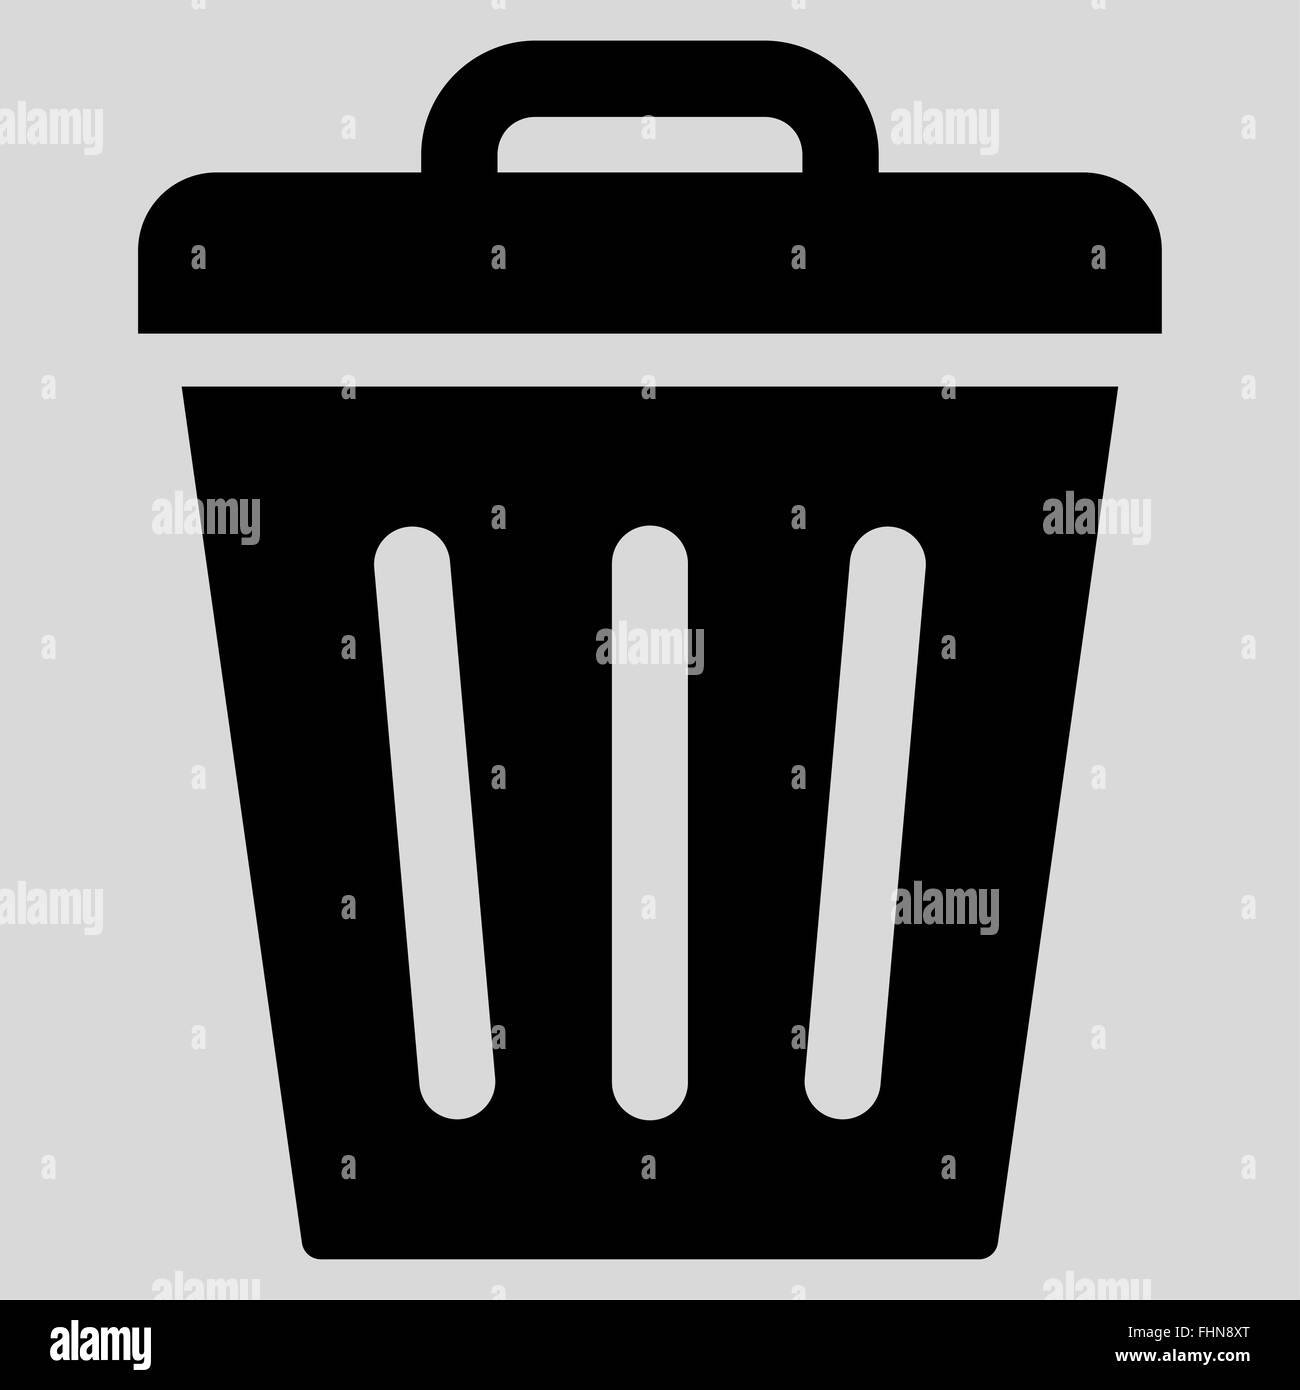 Trash Can flat black color icon Stock Photo